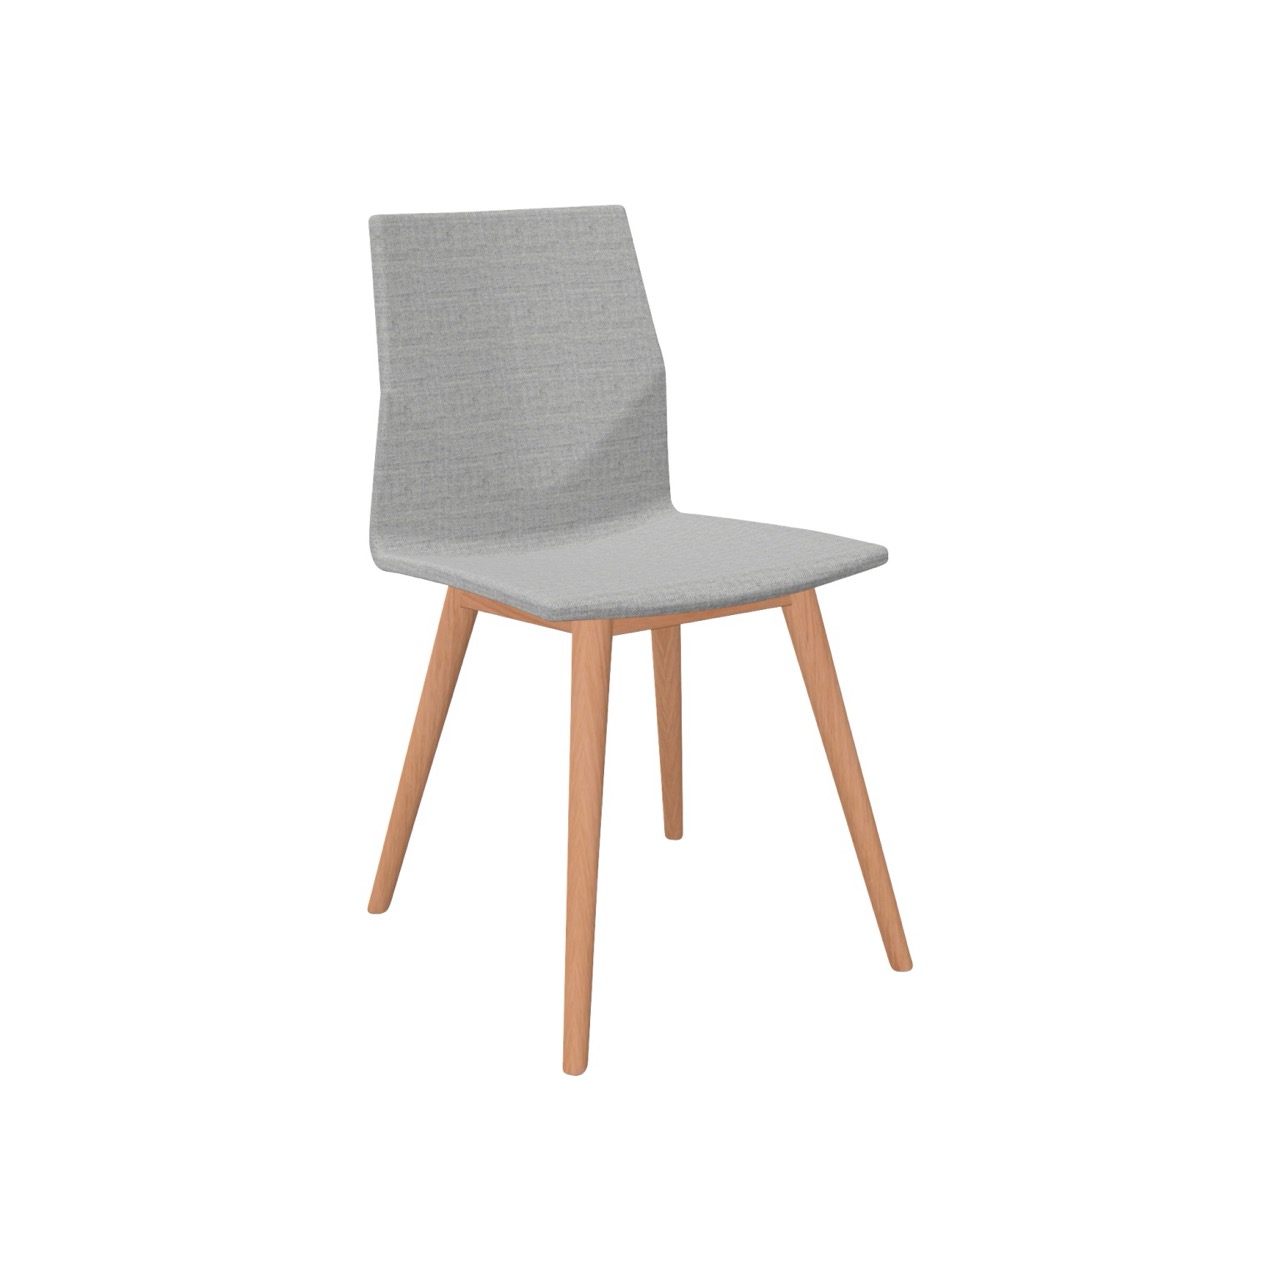 OCEE&FOUR – Chairs – FourCast 2 Four (Wooden Legs) – Packshot Image 3 Large